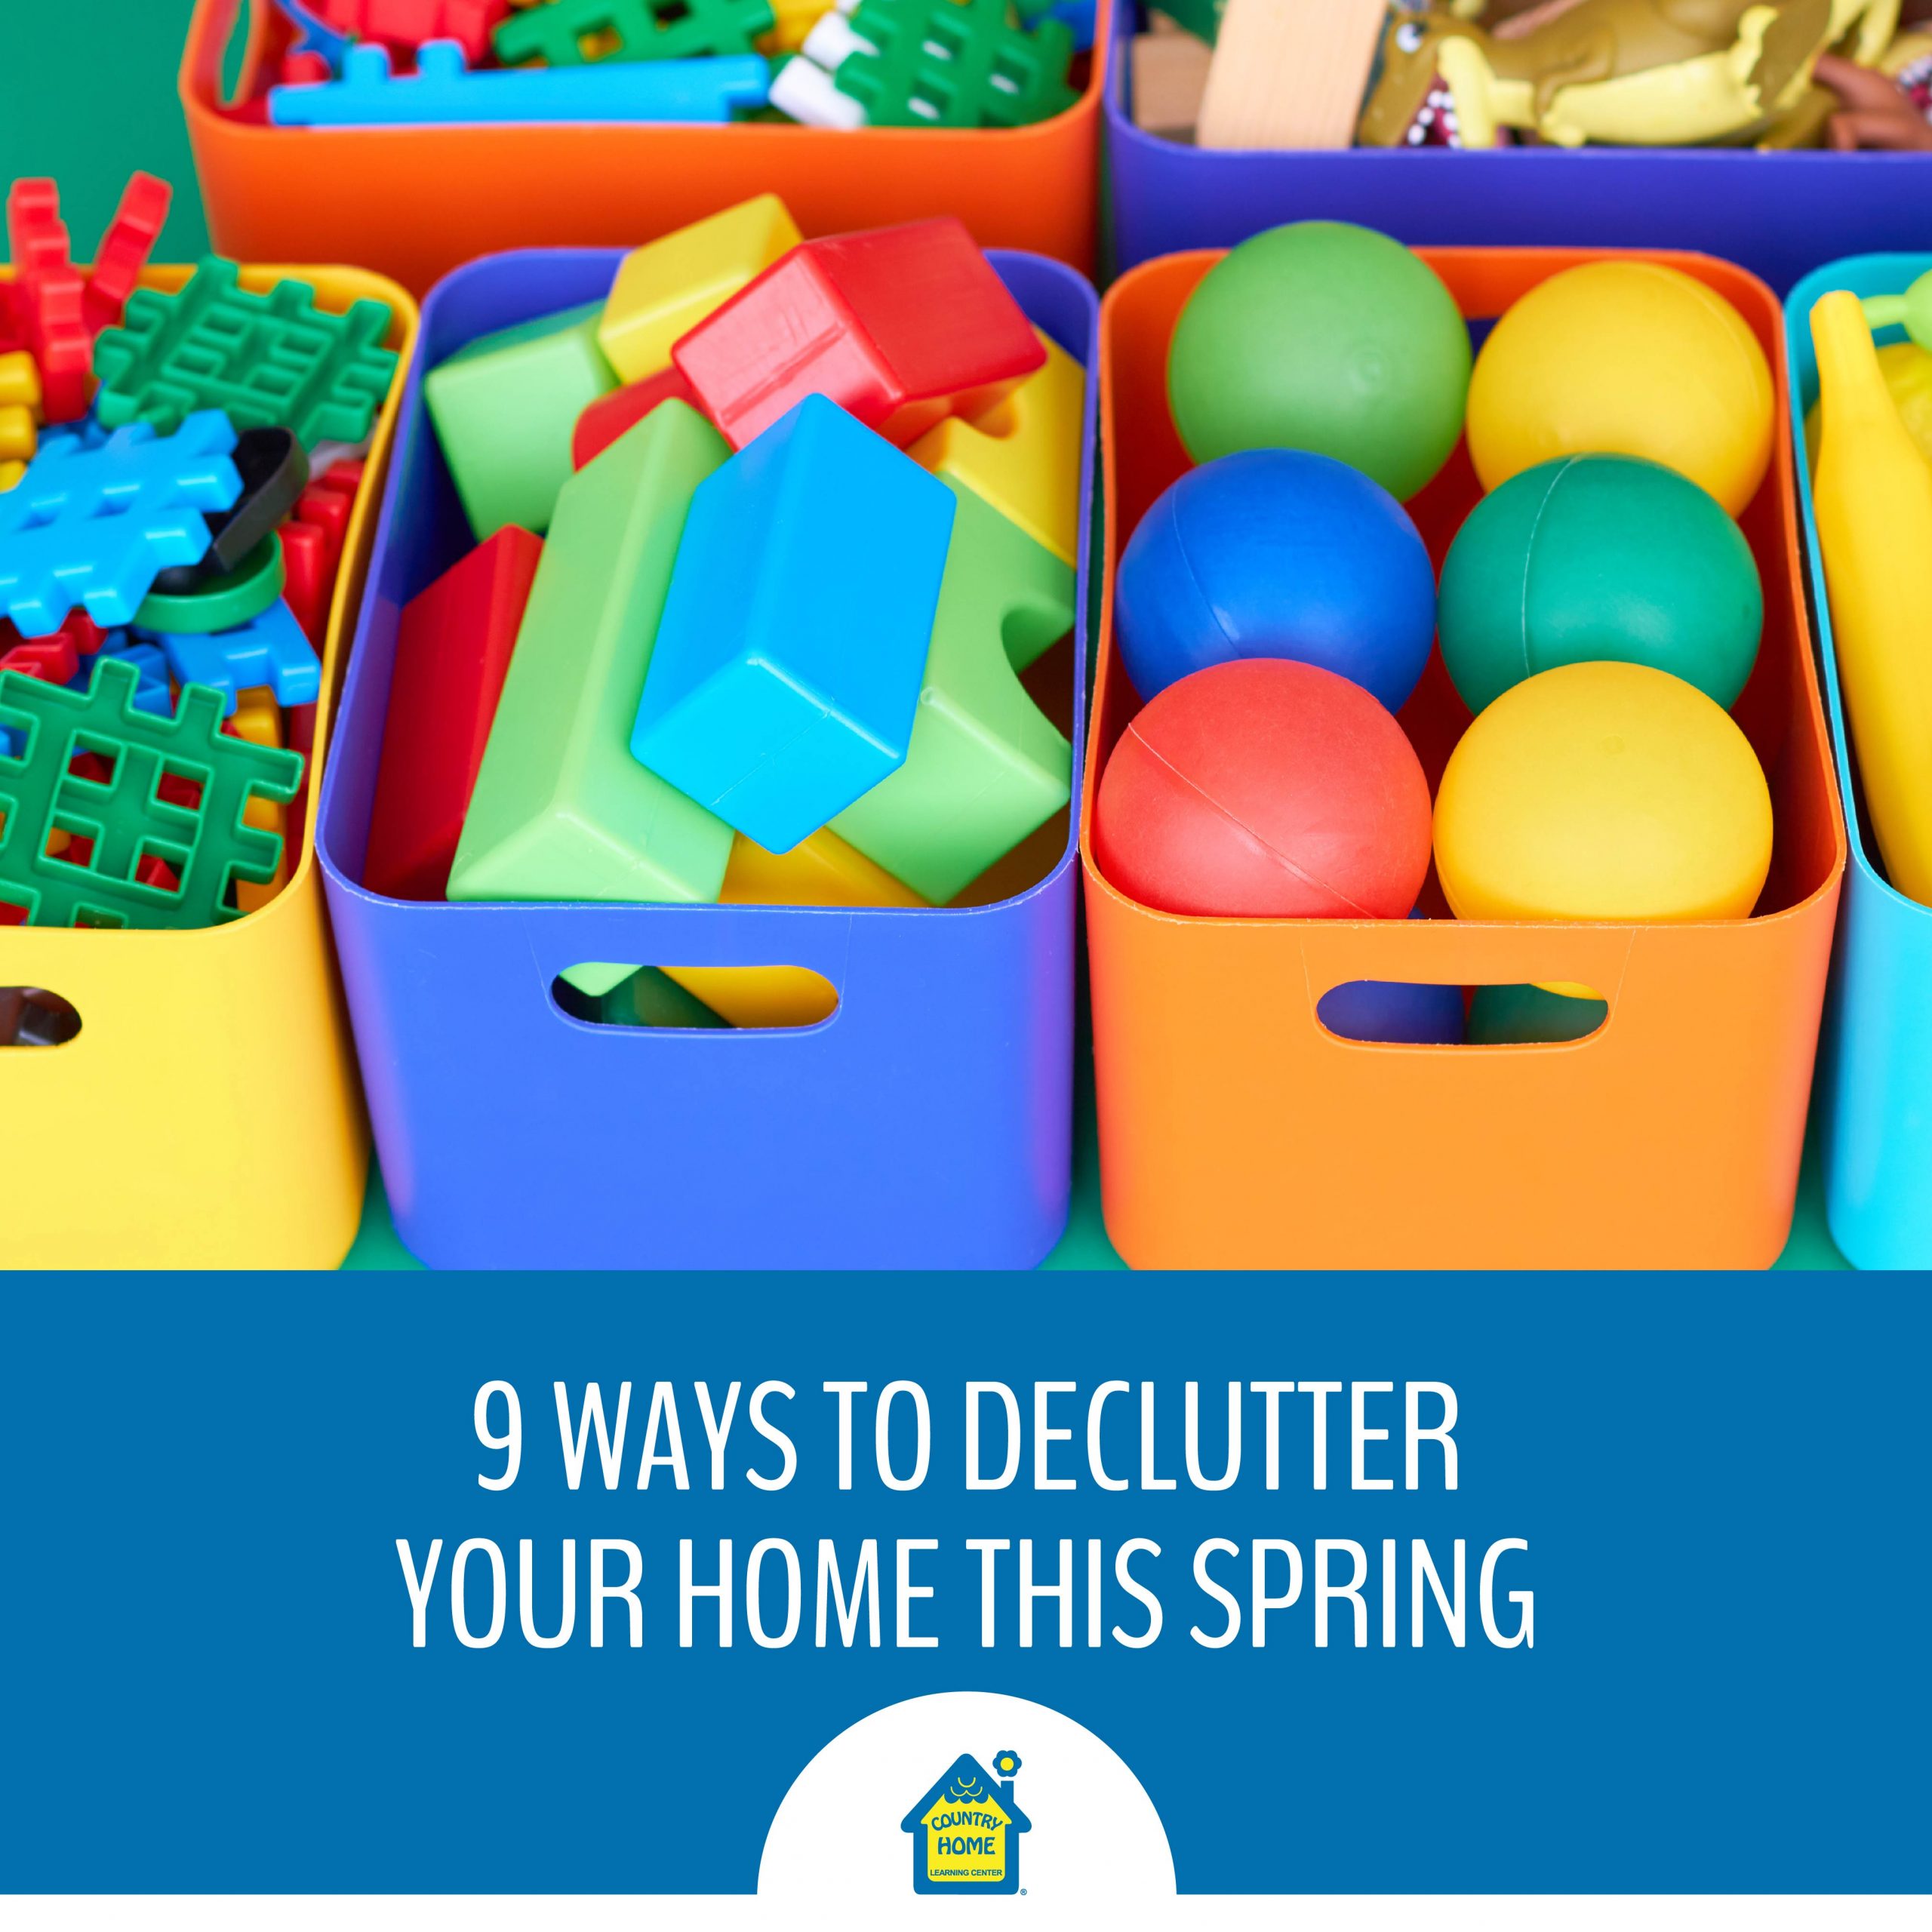 Declutter Your Home This Spring